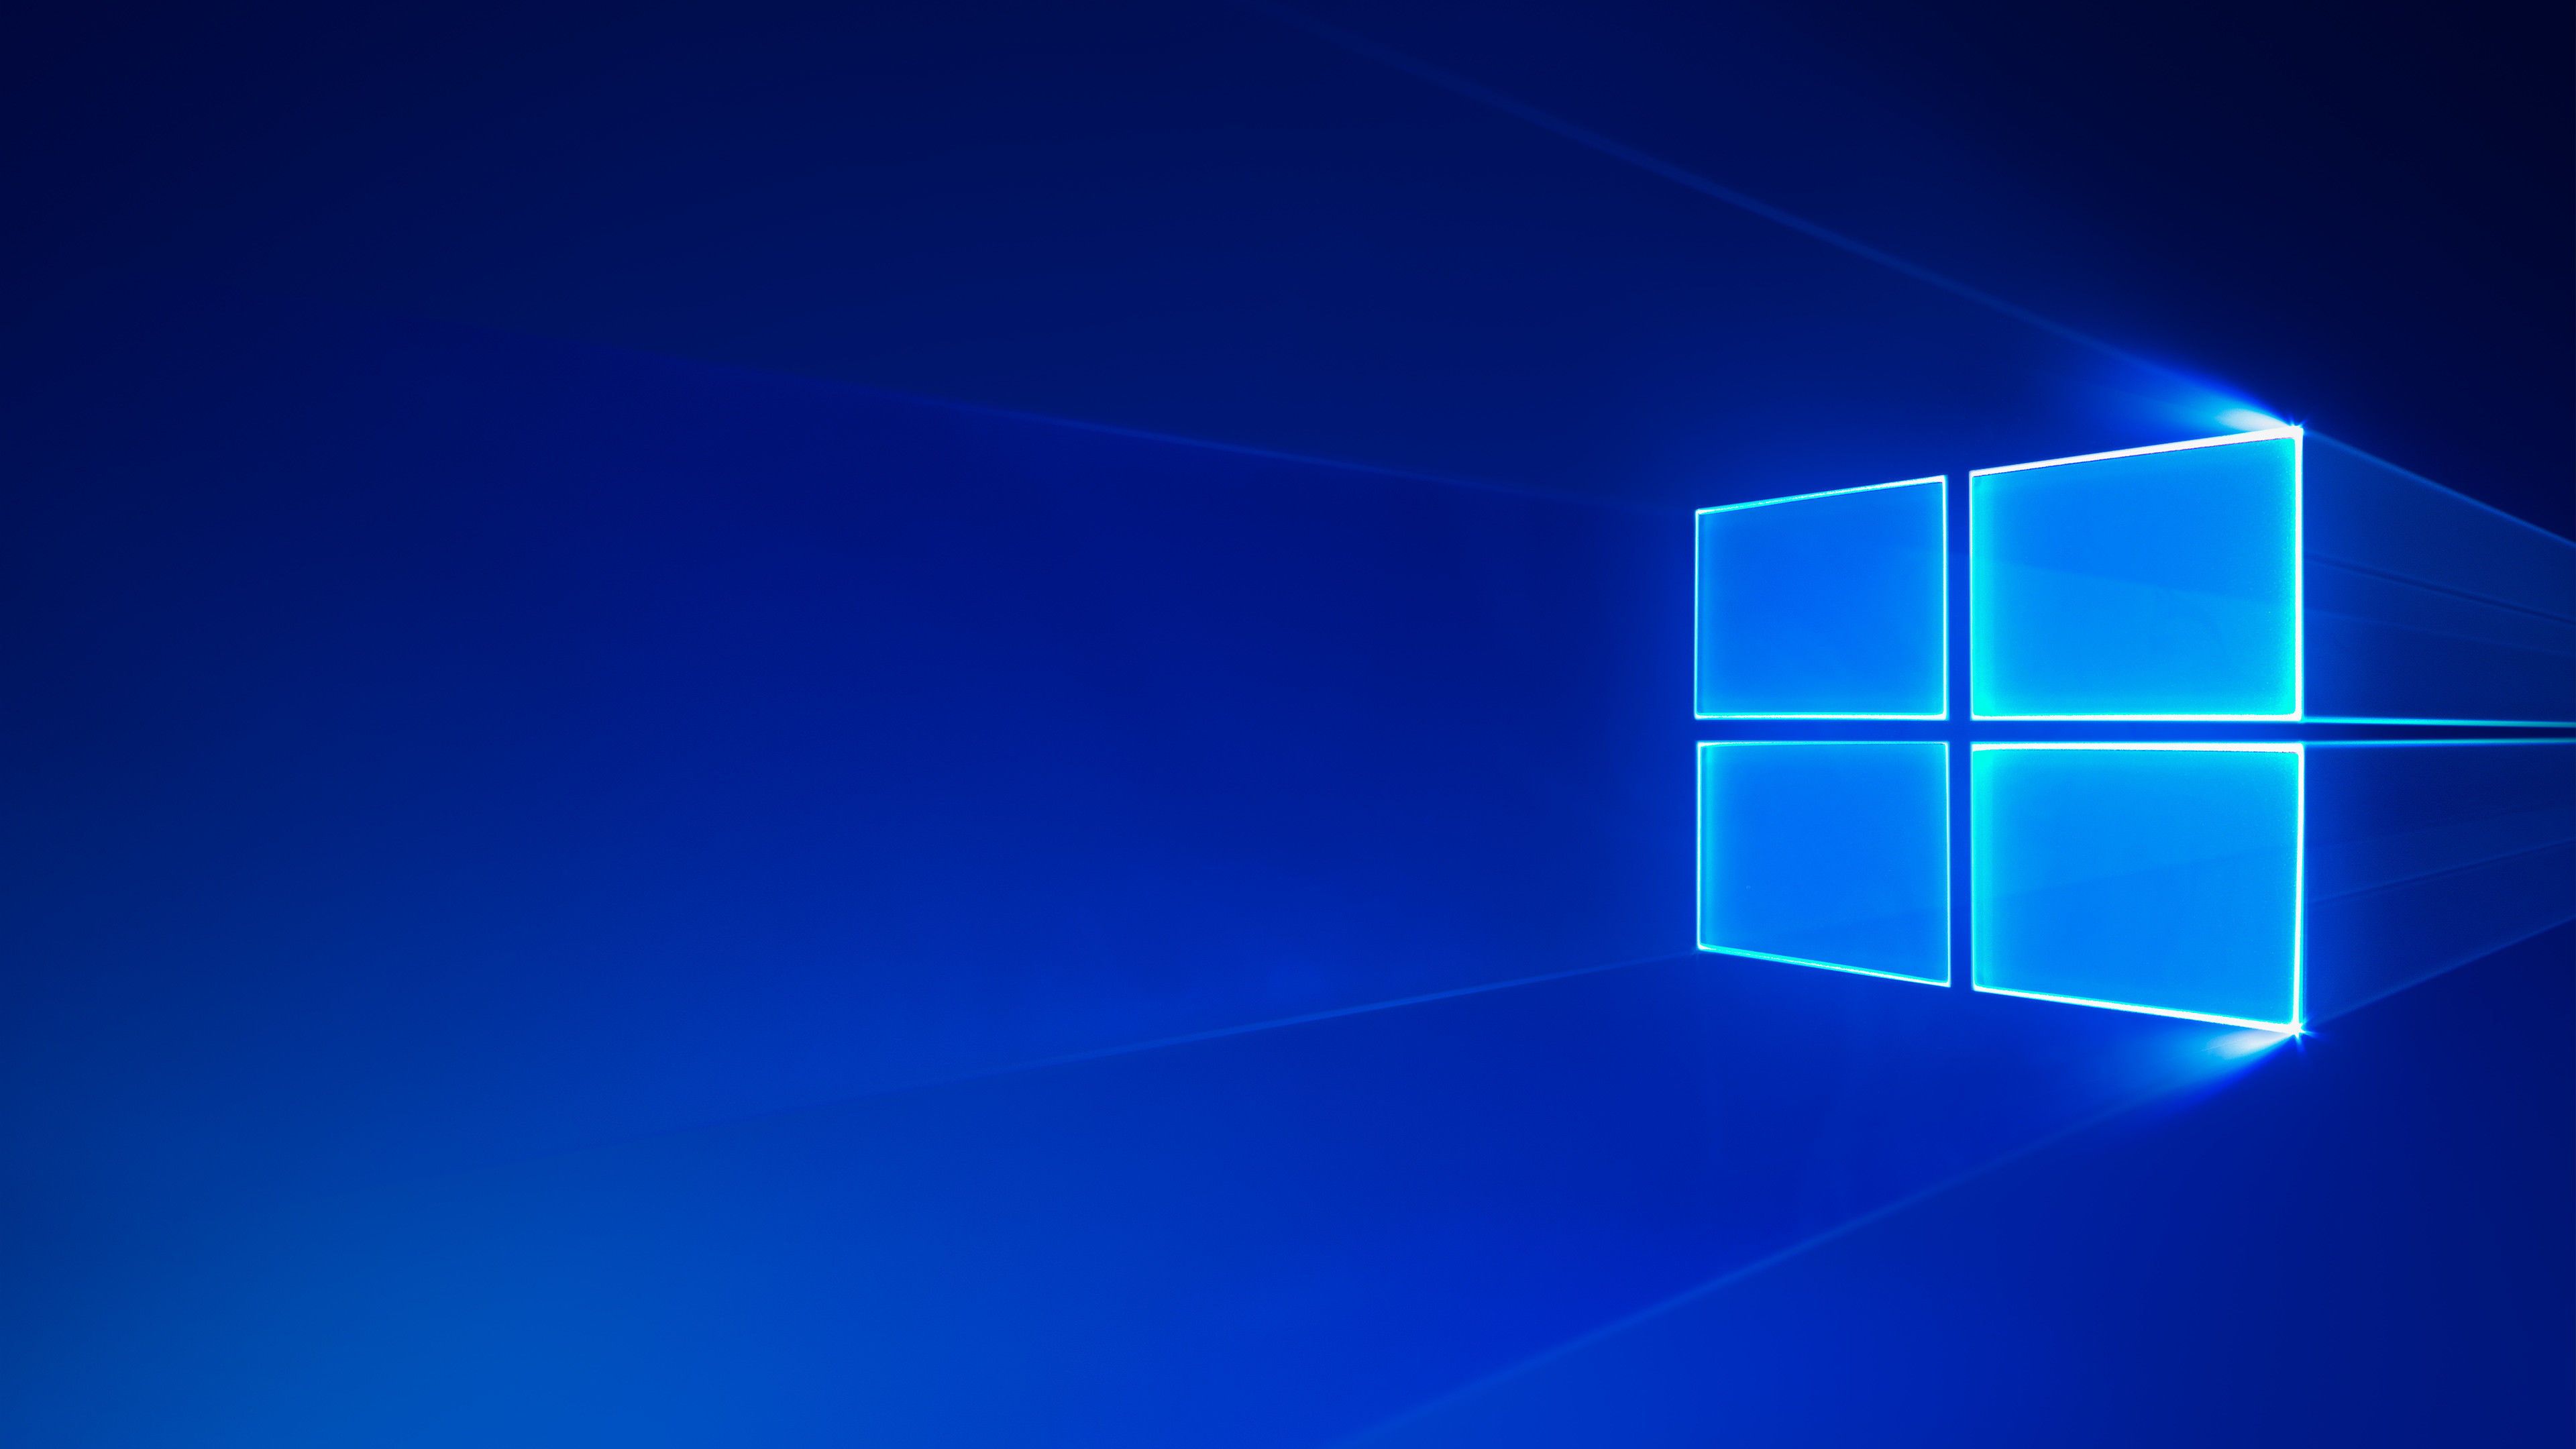 Download Windows 10 Wallpapers and Lock Screen Backgrounds – AskVG